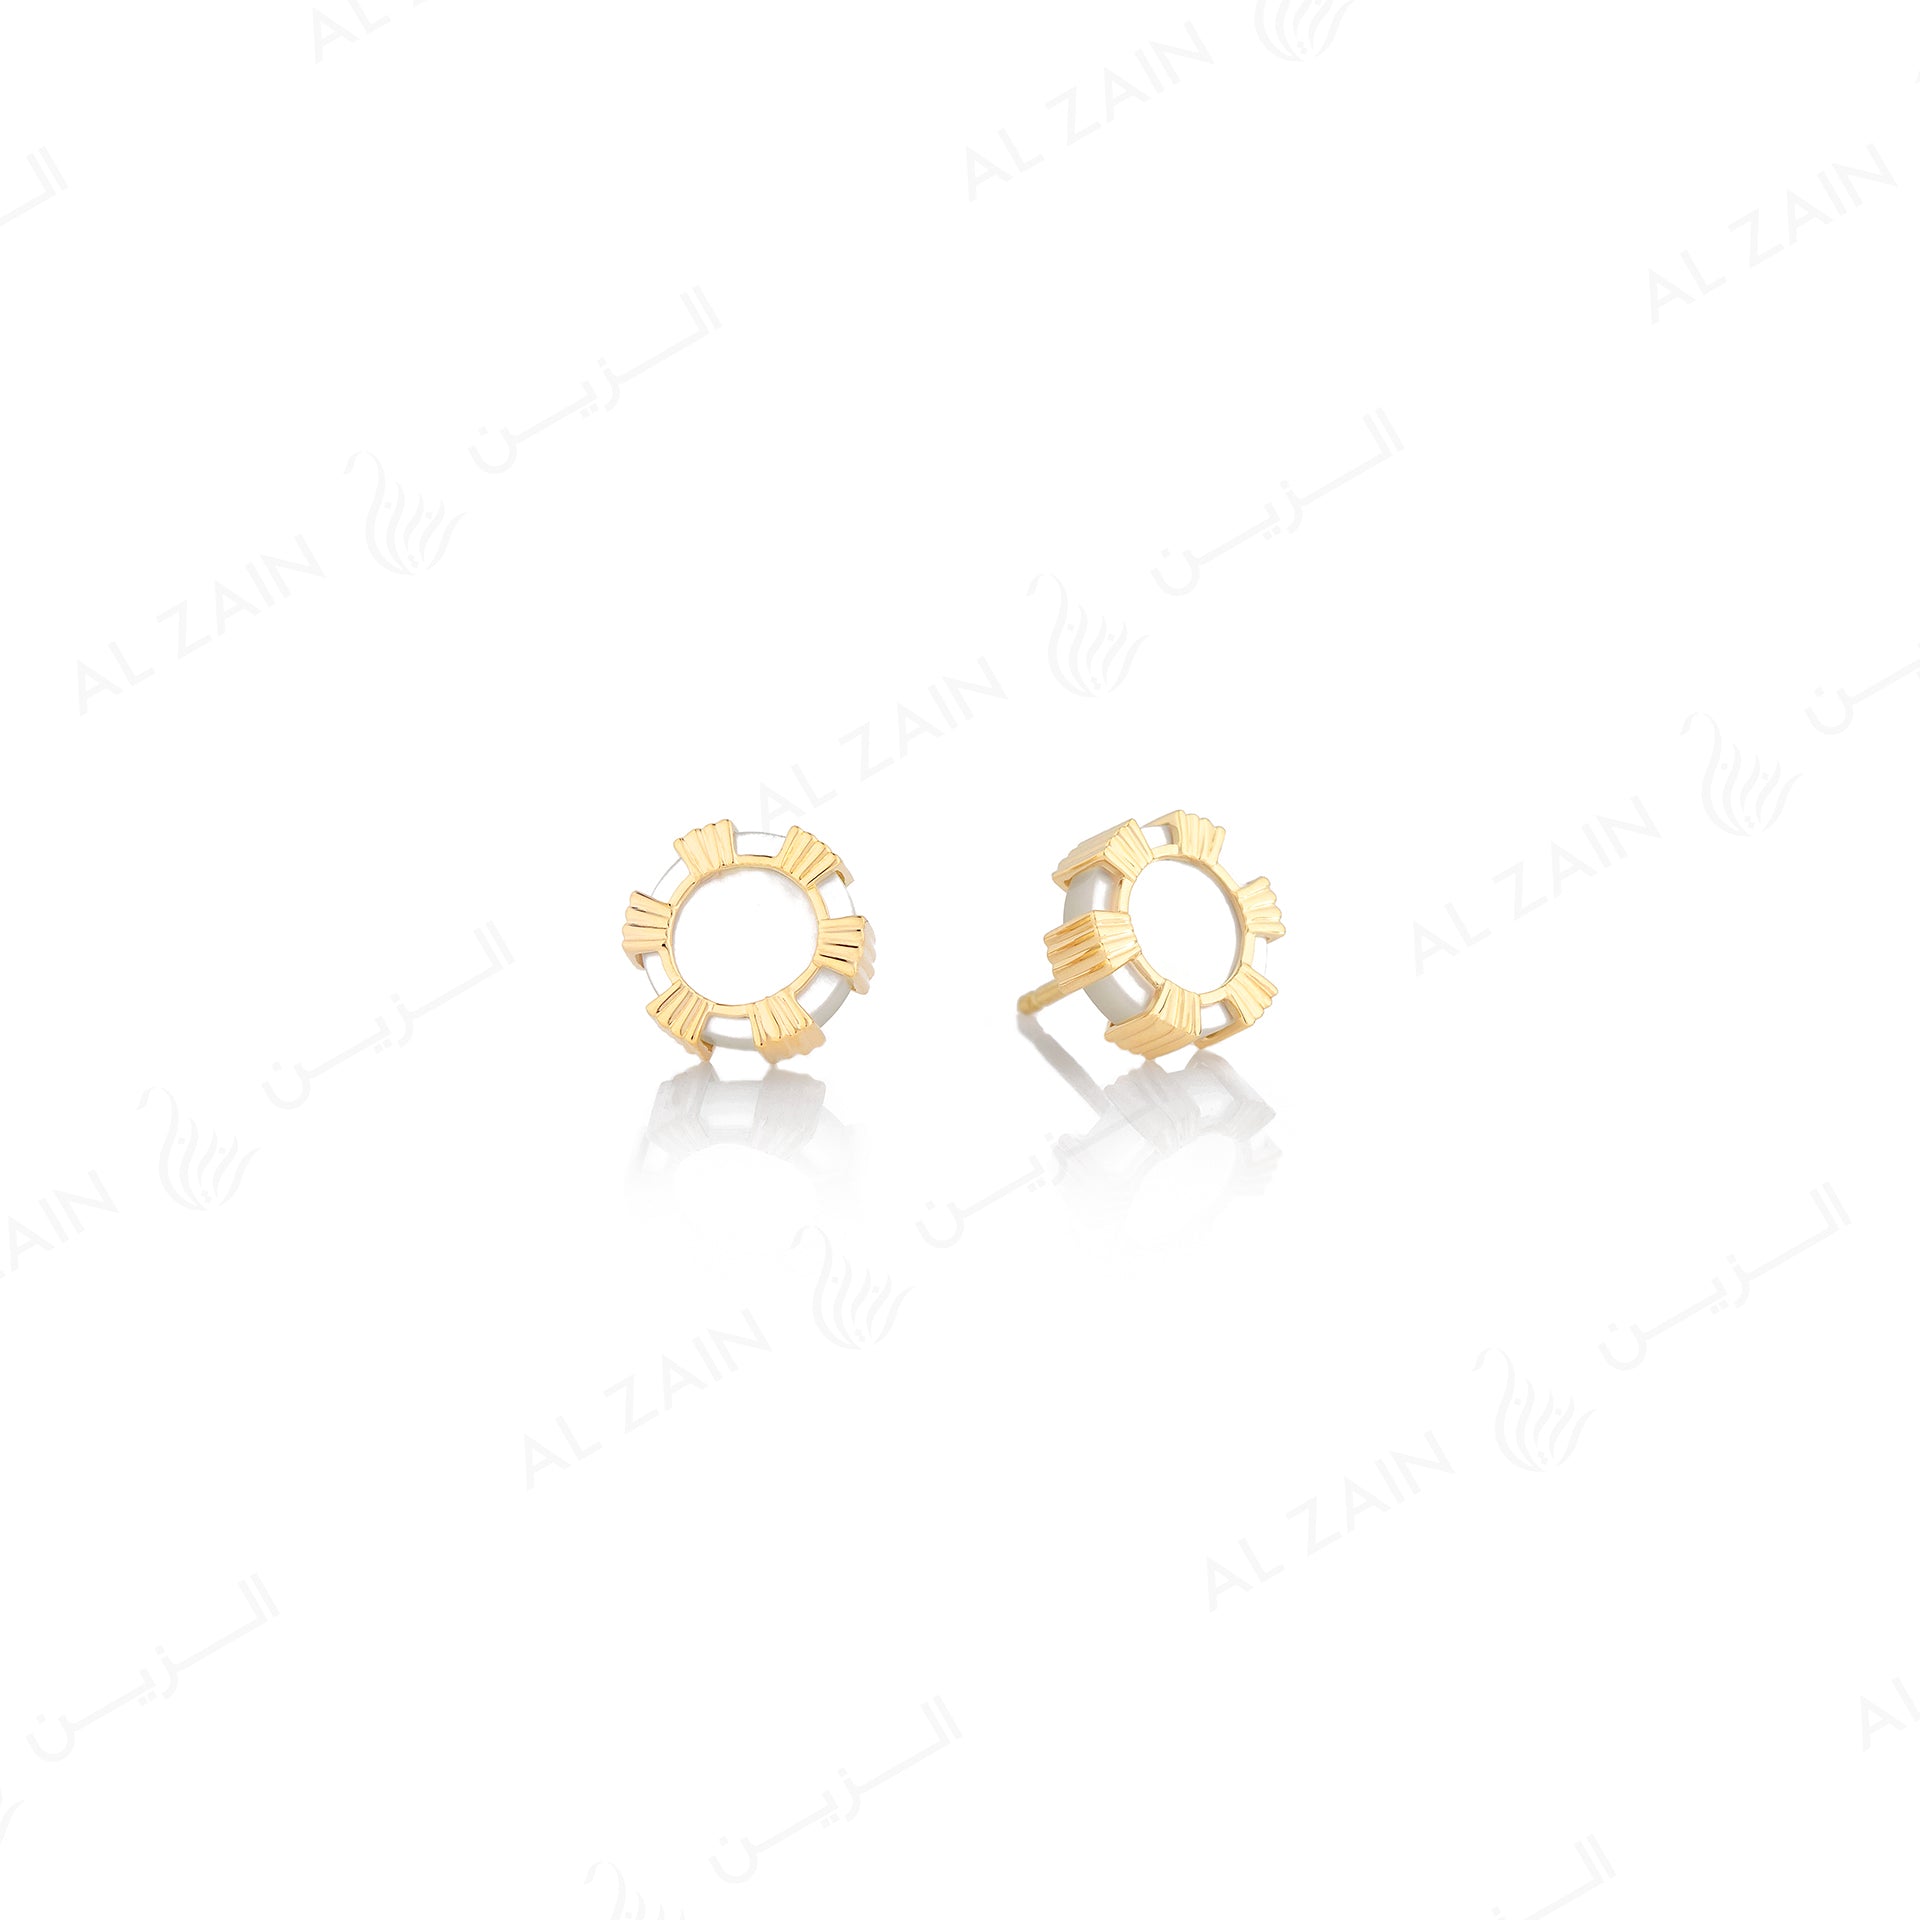 Cordoba earrings in yellow gold with mother of pearl stones